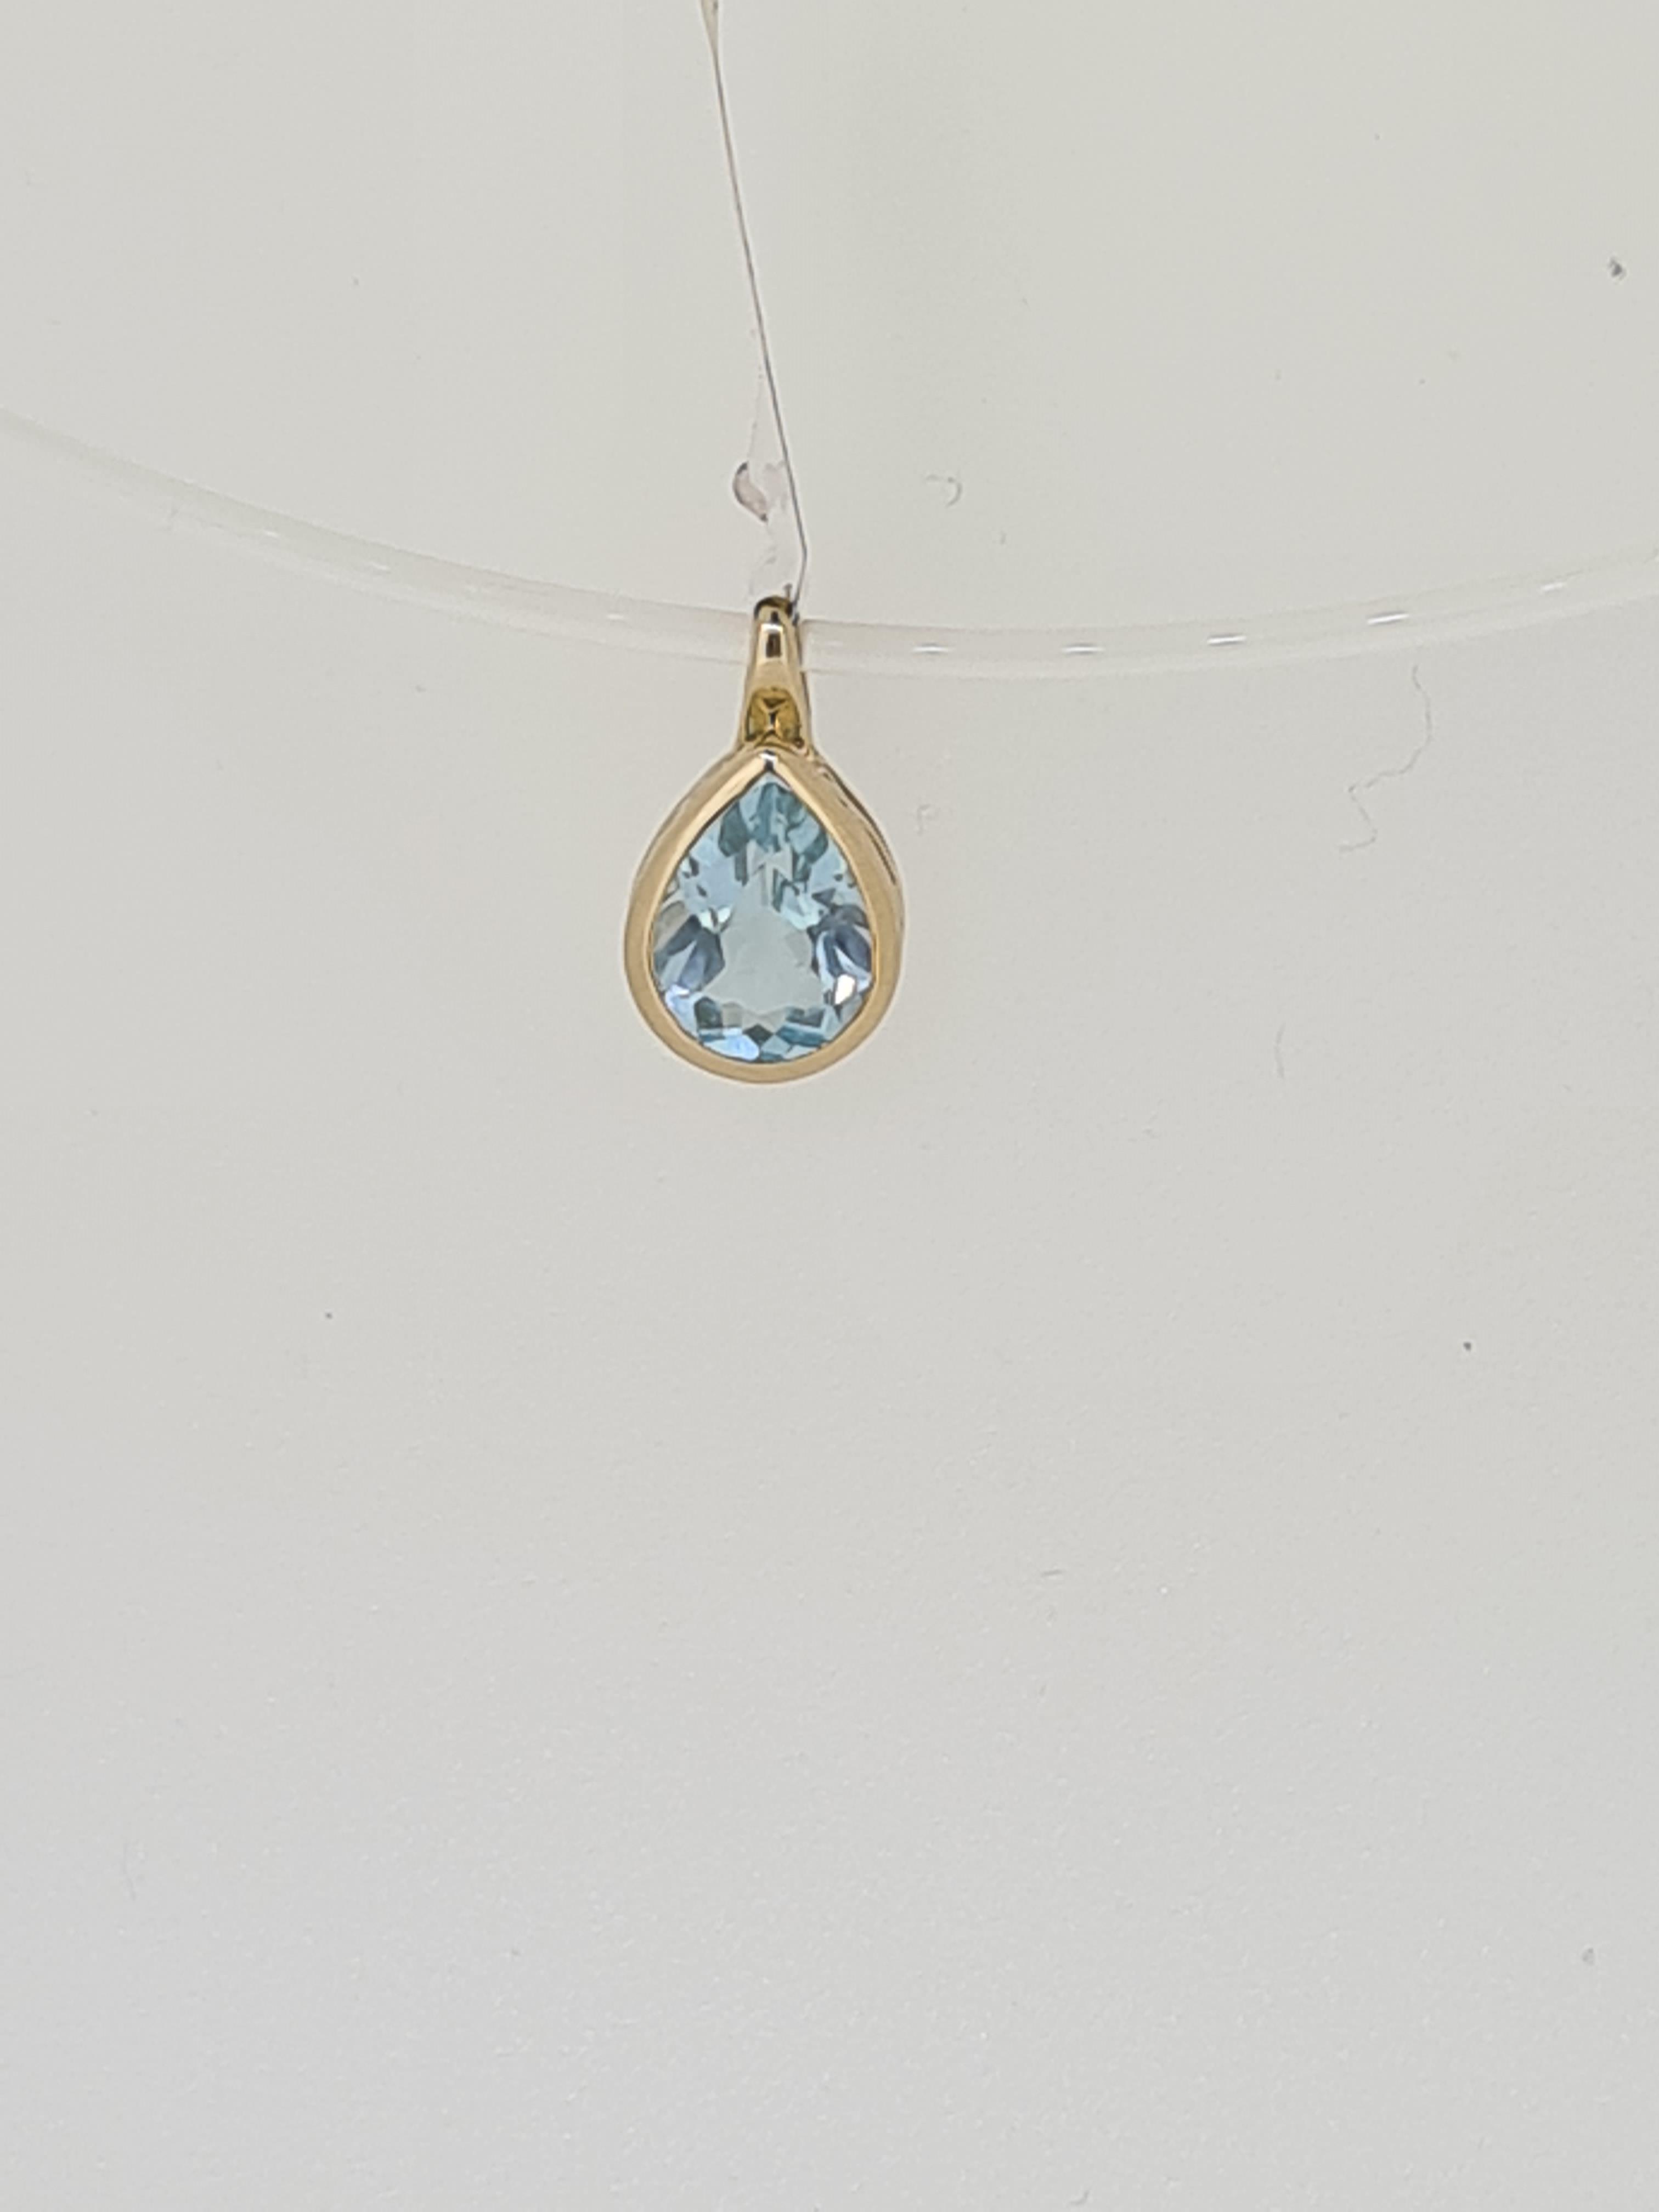 375 yellow gold pear cut topaz pendant - Image 3 of 3